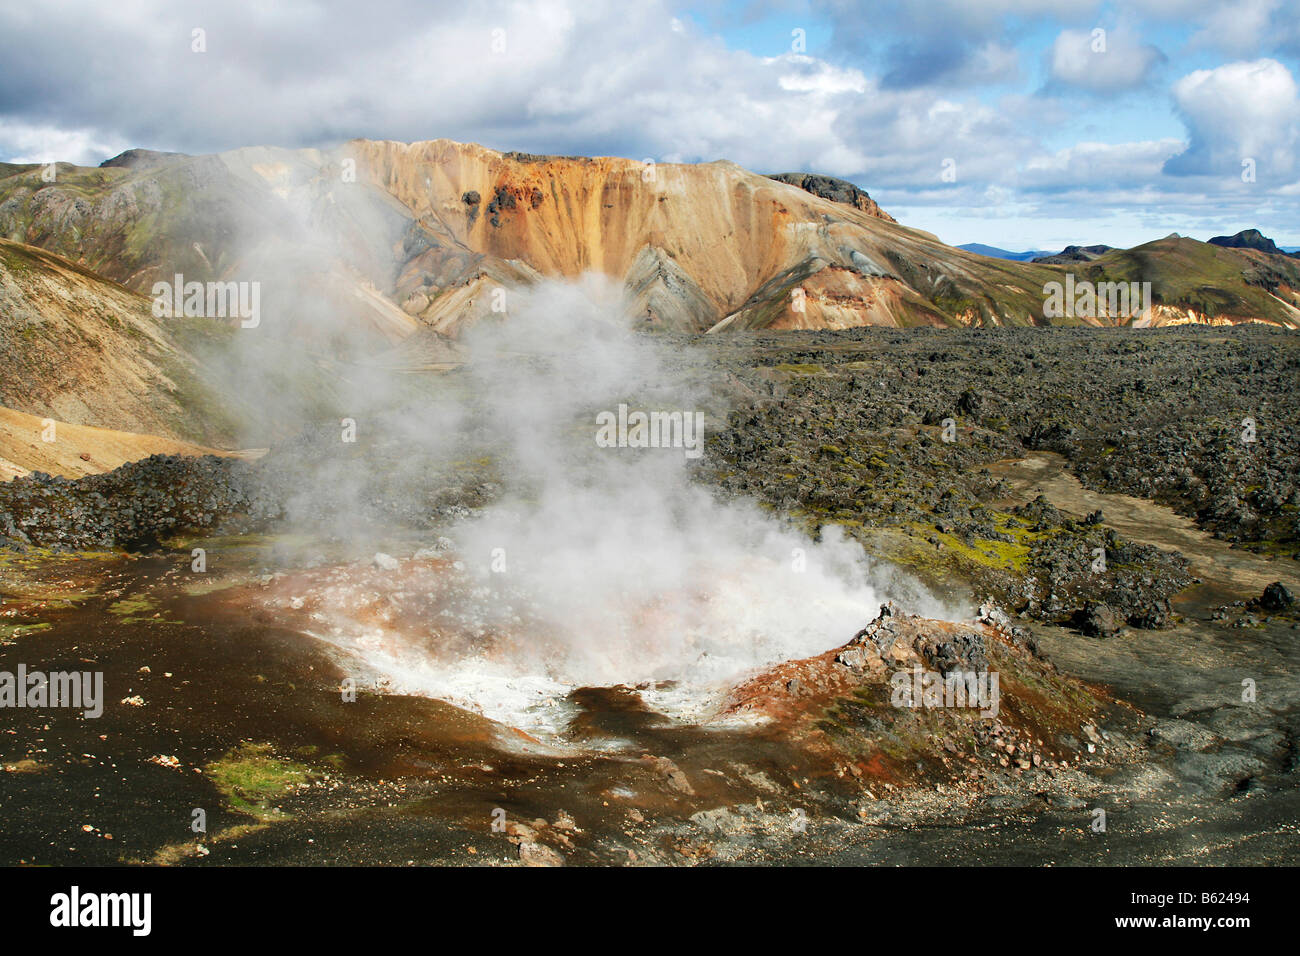 Hot and steaming springs, fumaroles, in the lava fields in front of the colourful Rhyolith Mountains of Landmannalaugar, Icelan Stock Photo